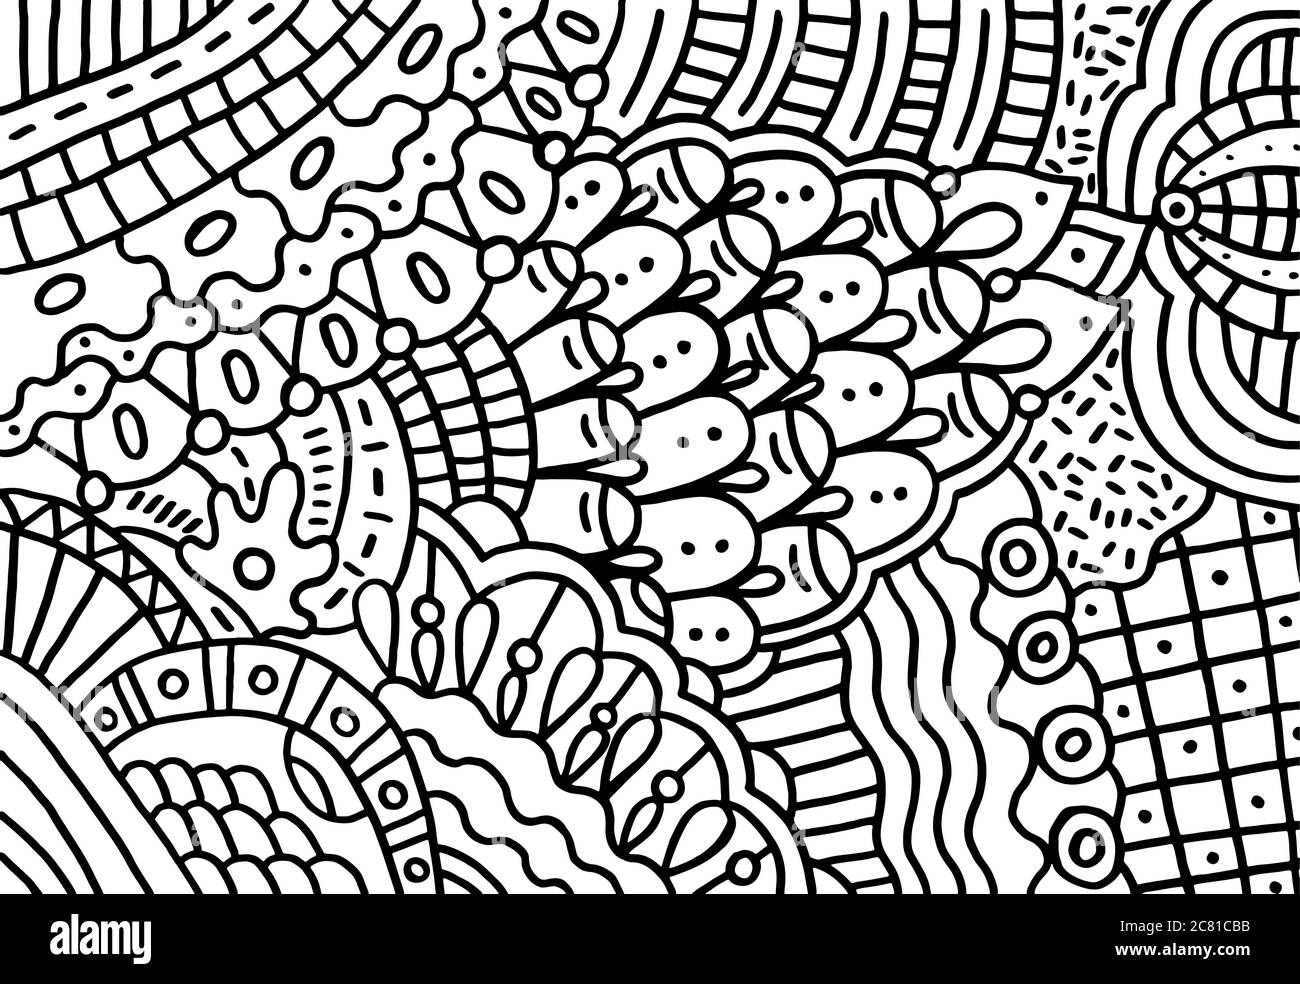 Doodle pattern for coloring book for adults coloring page with floral abstract motifs psychedelic texture zentangle pattern vector illustration stock vector image art